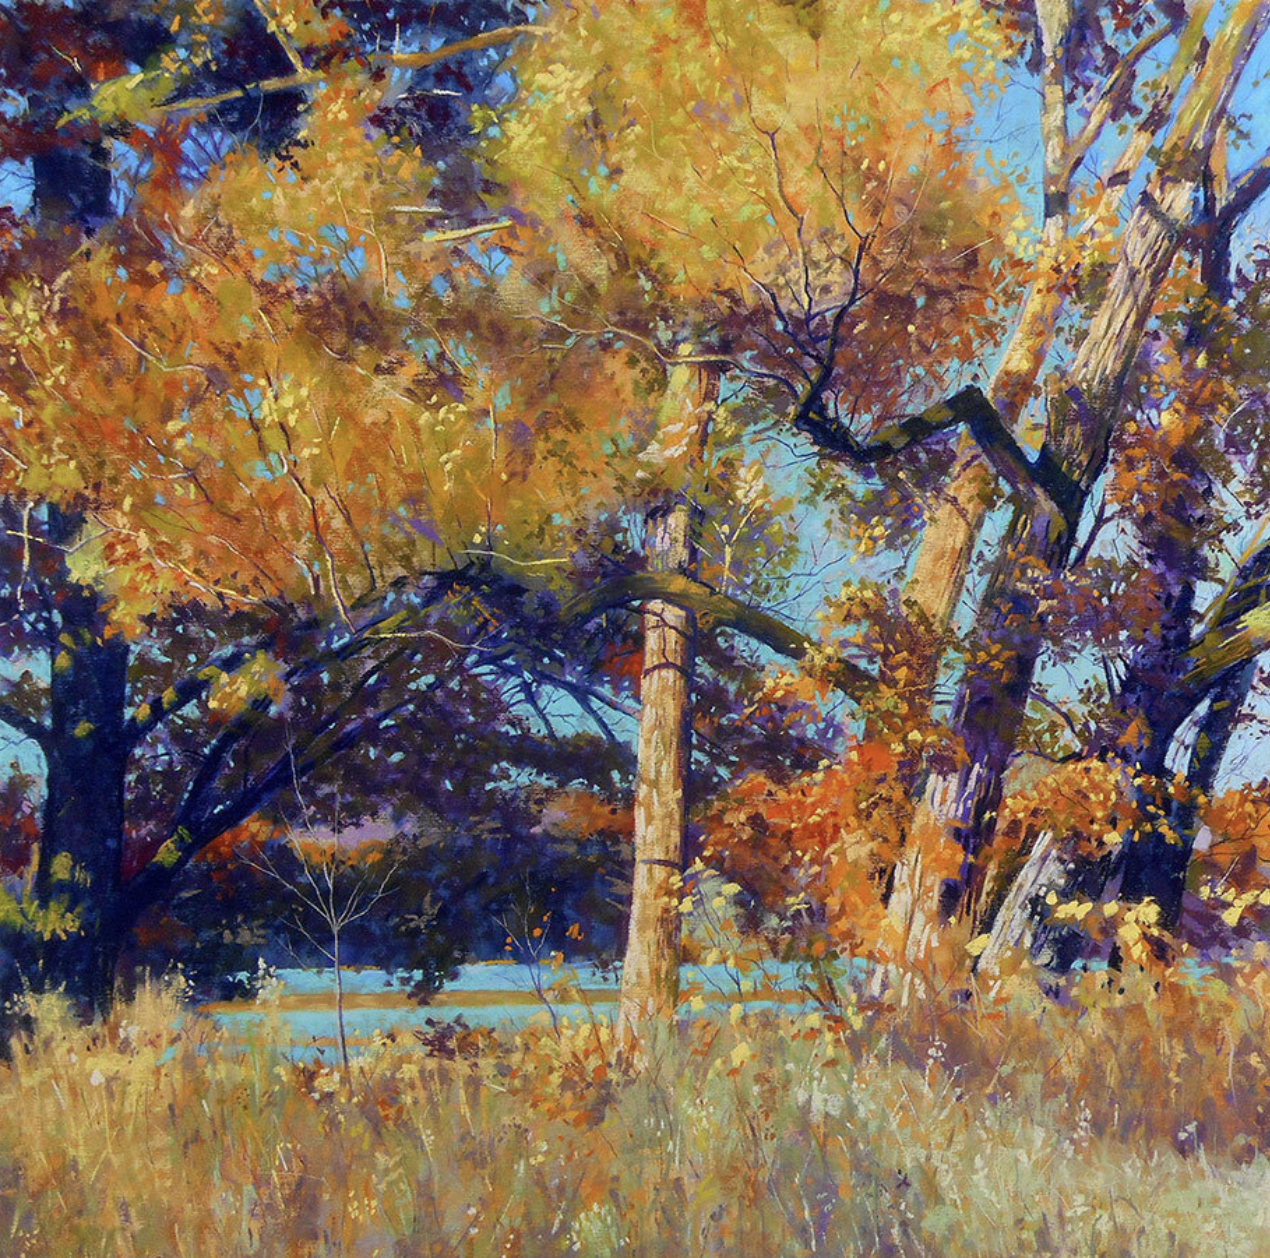 Autumn paintings - Clarence Porter, "Walk in Cootes Paradise IX," pastel, 21 x 21 in.